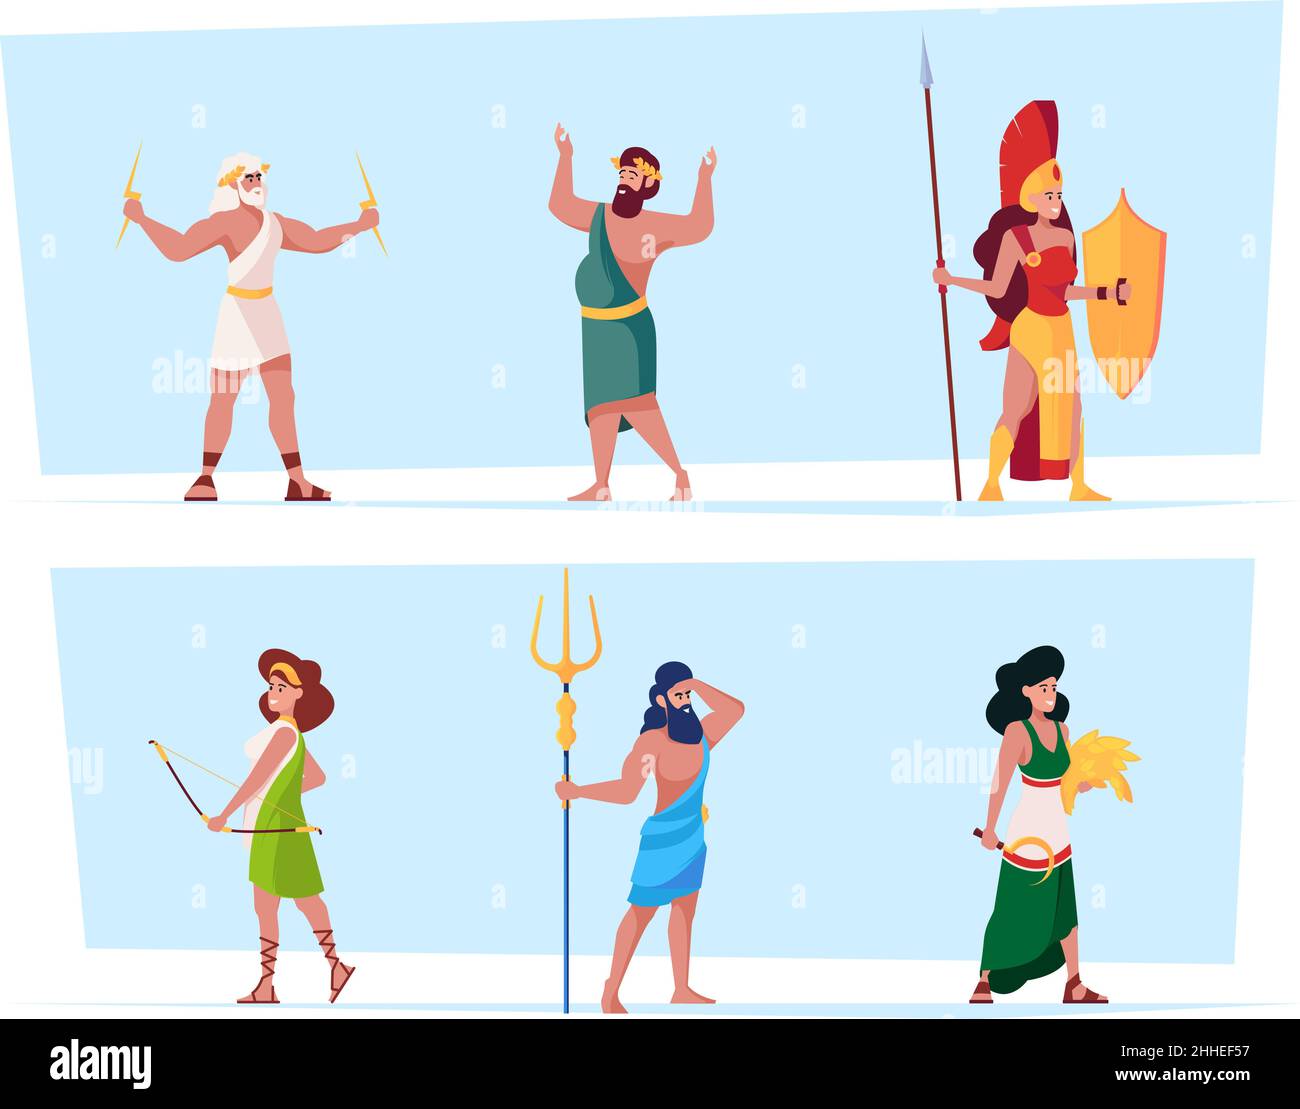 Greek mythology characters. Ancient goddess from pantheon romans persons hestia mars female godly on olympus garish vector flat templates Stock Vector